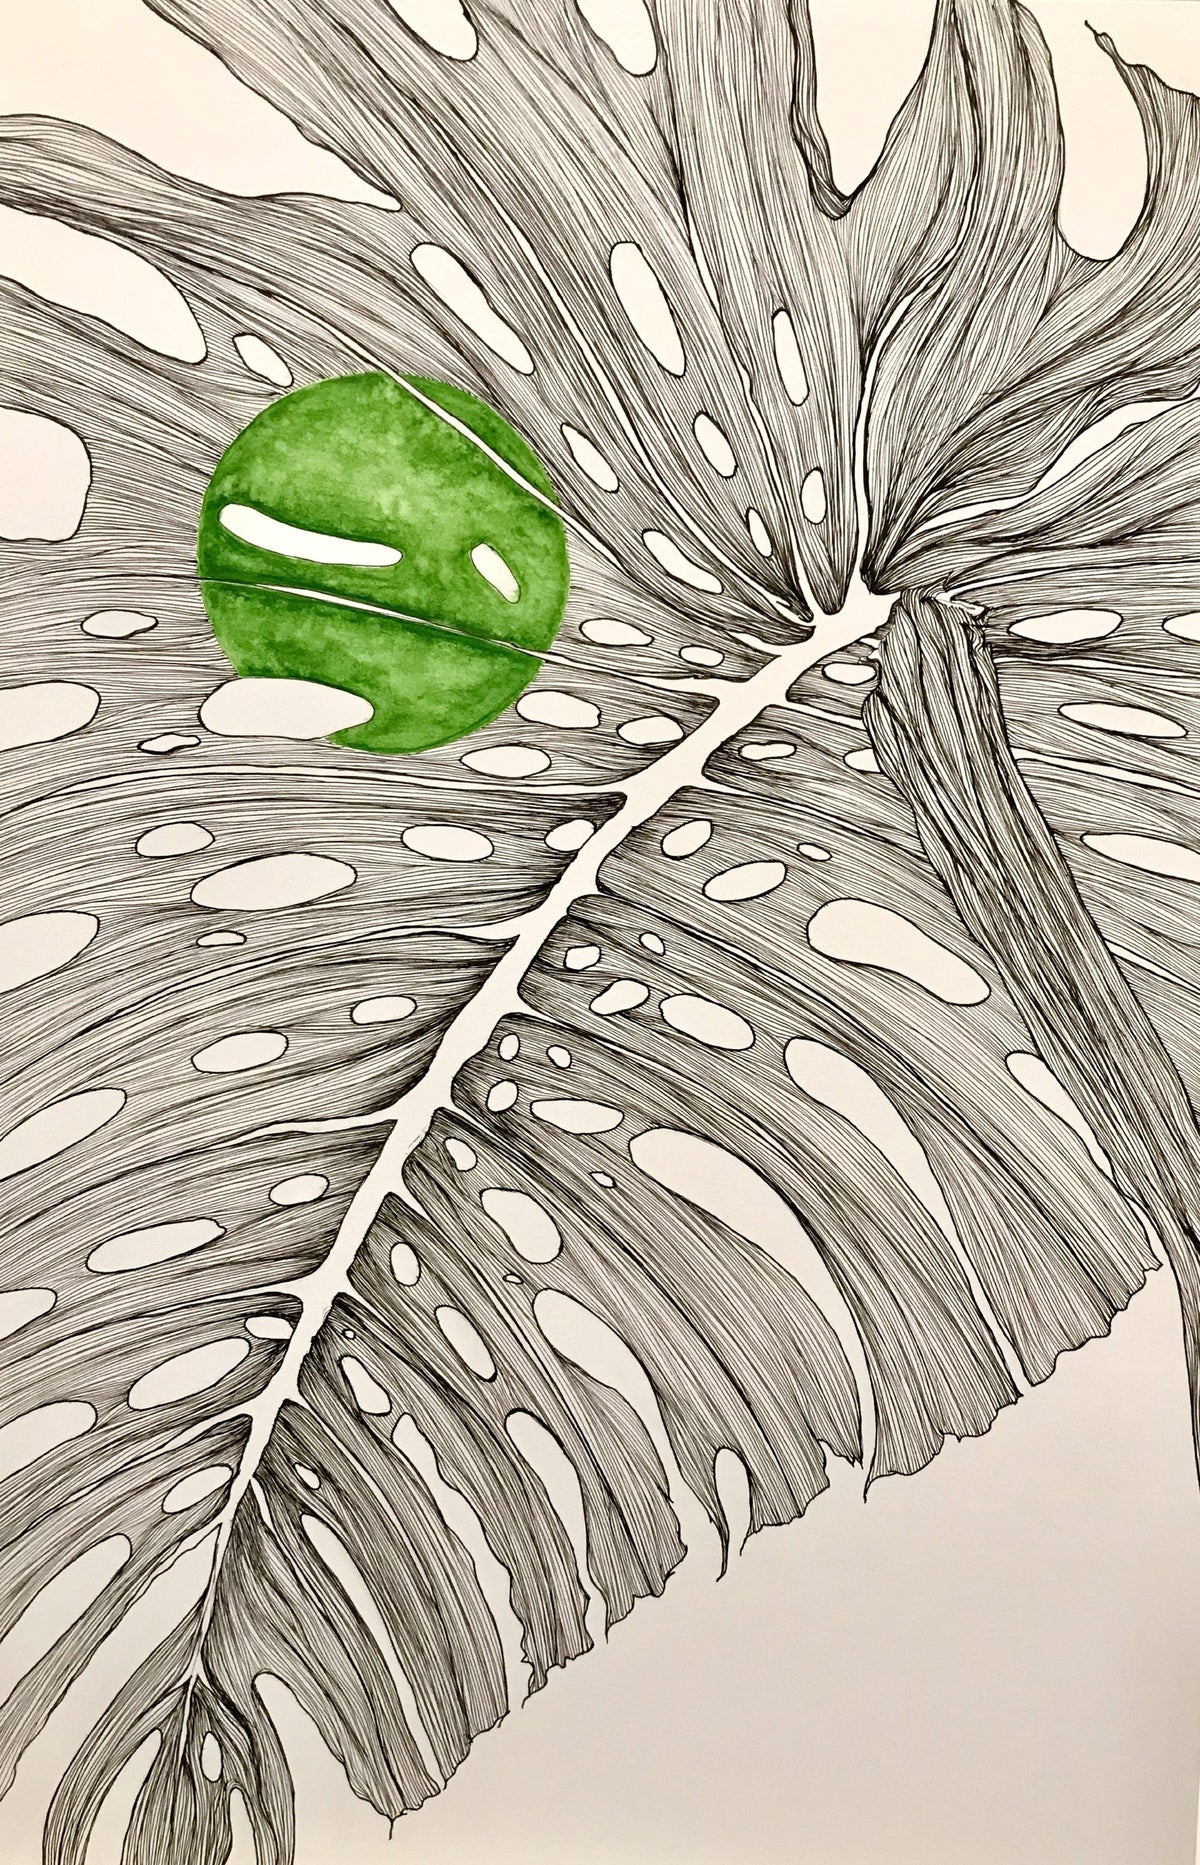 Abstract Leaf Art with detailed lines & a feeling of surrender in the green circle